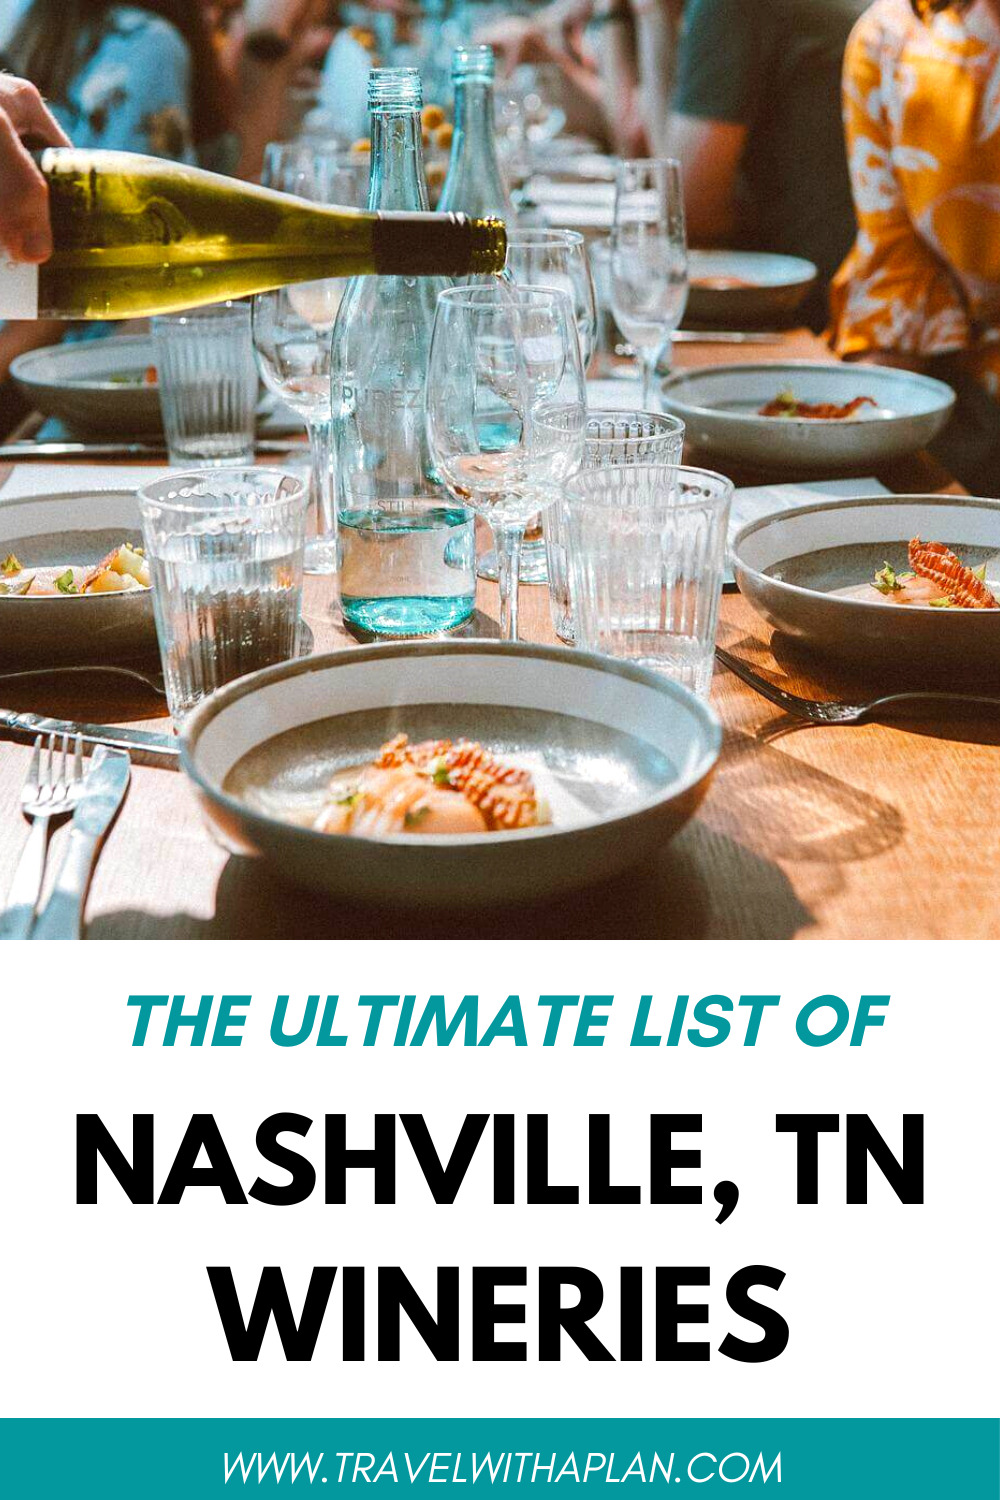 Check out our list of the best Nashville wineries for your Tennessee getaway!  Enjoy this awesome wineries in Nashville during your date-night or girls' night out!  #Nashville #wineriesinNashville #girlstrip #bestwineries